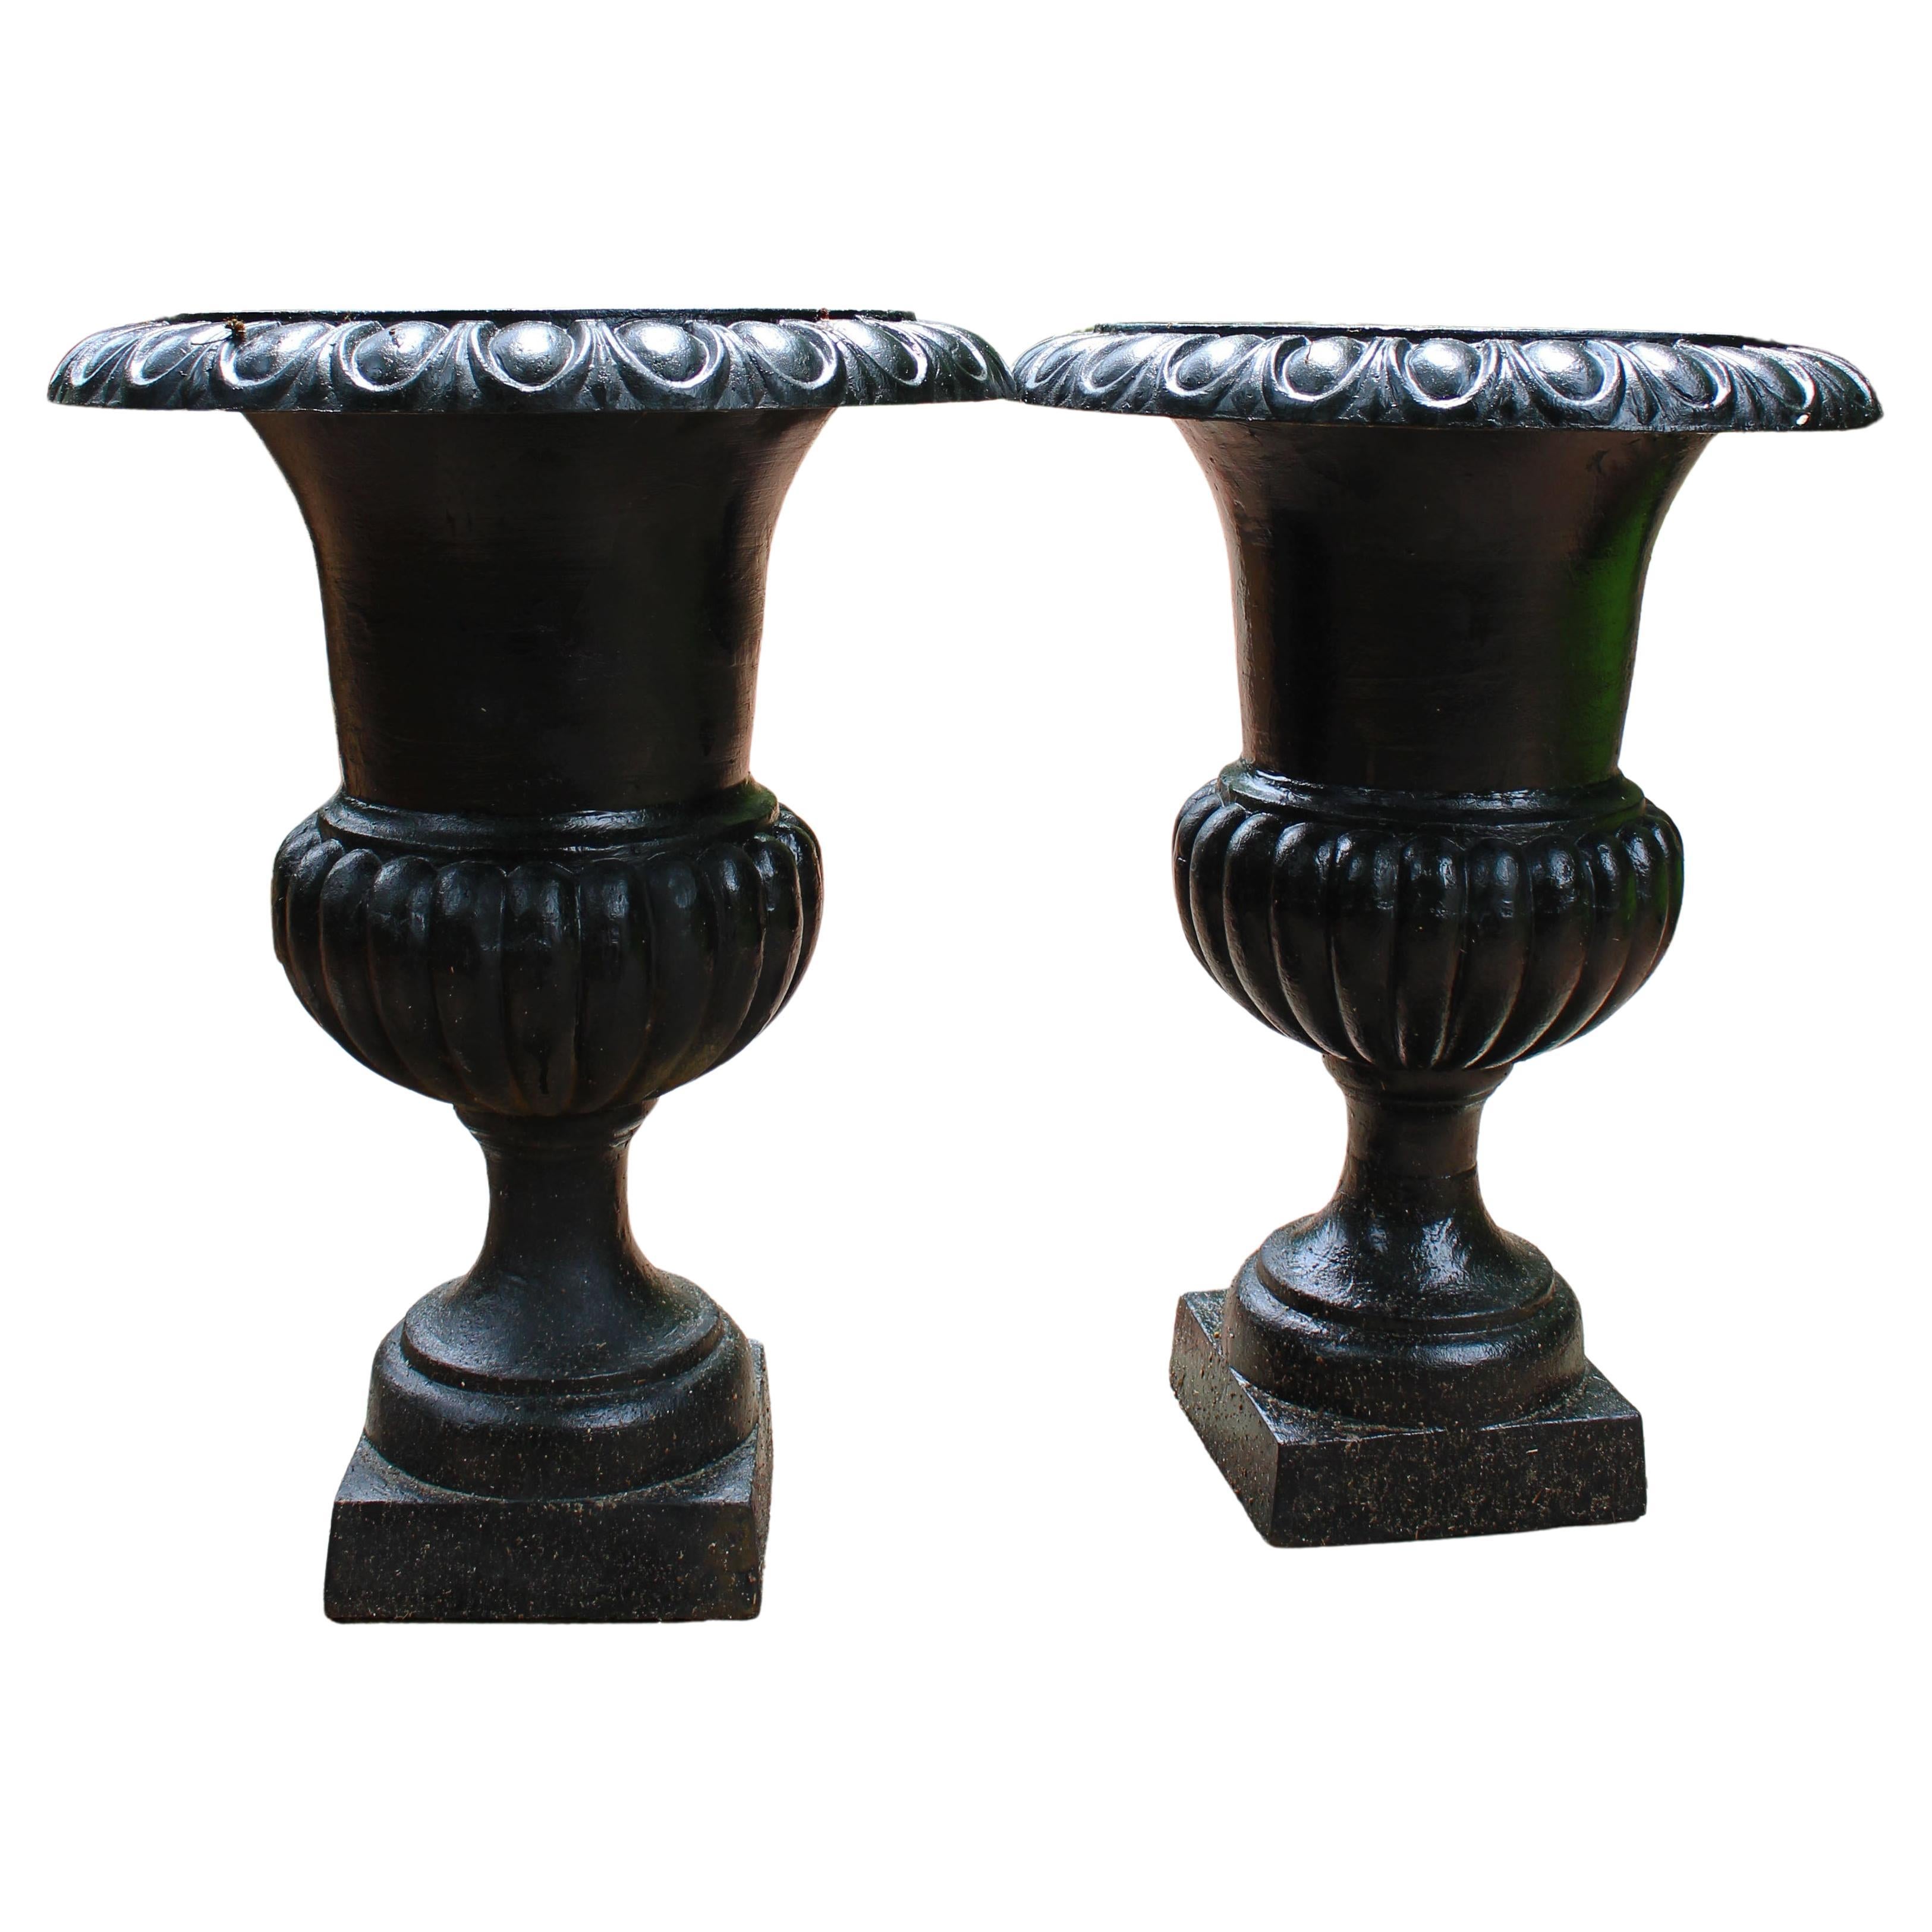 Pair of Campana Form Cast Iron Garden Urn Planters, Neoclassical Style